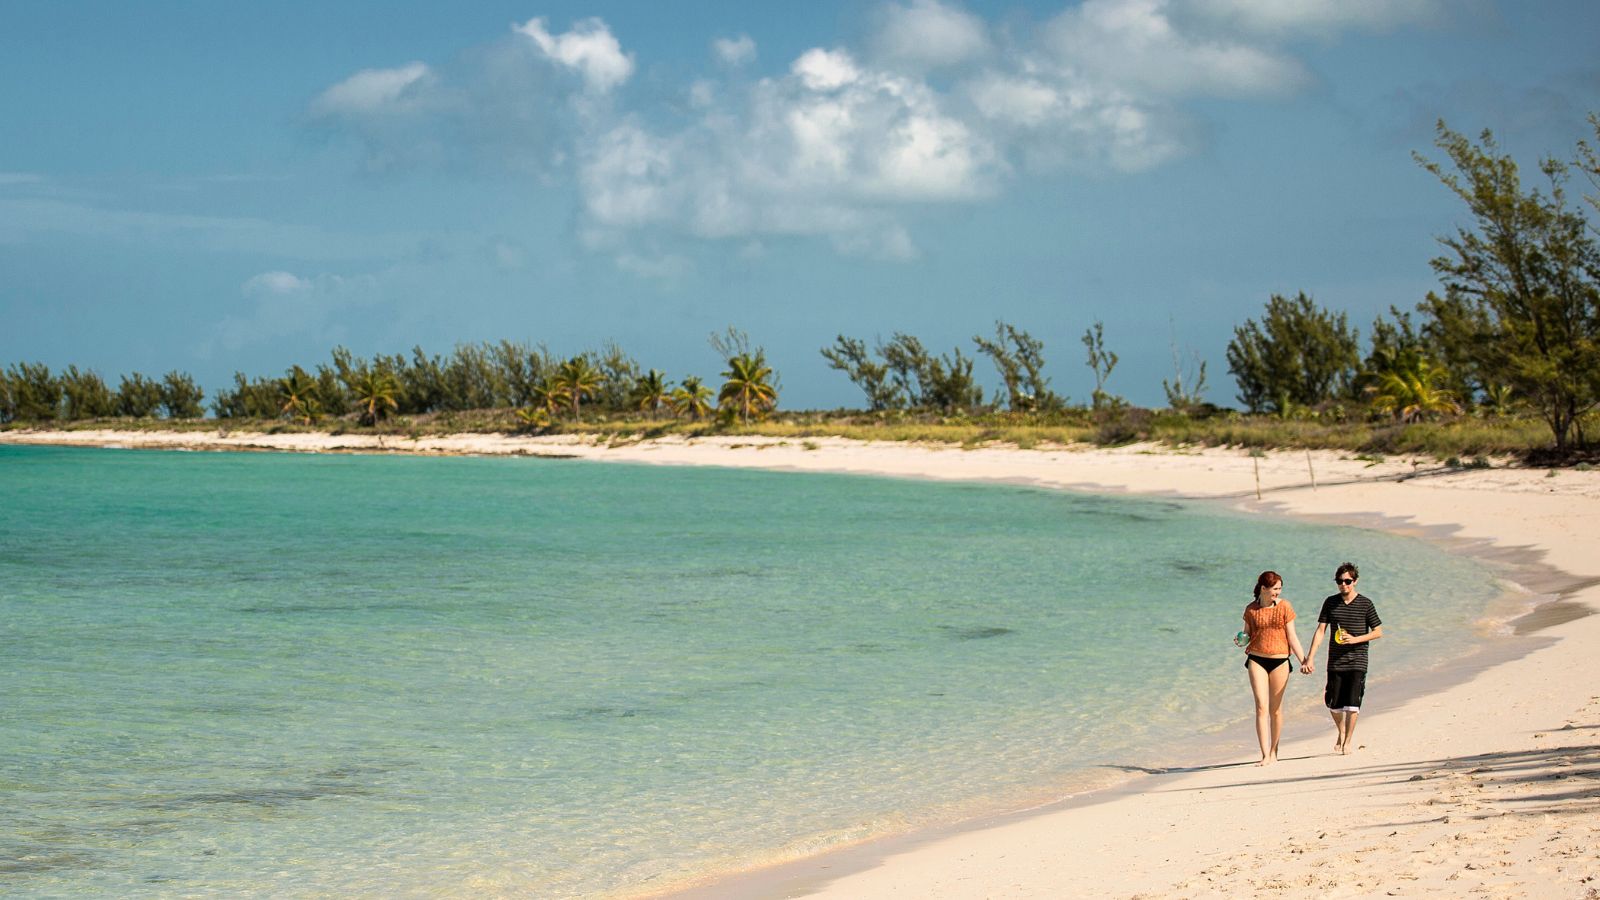 Serenity Bay is an adults-only area on Disney's Castaway Cay private island (Photo: Disney Cruise Line)